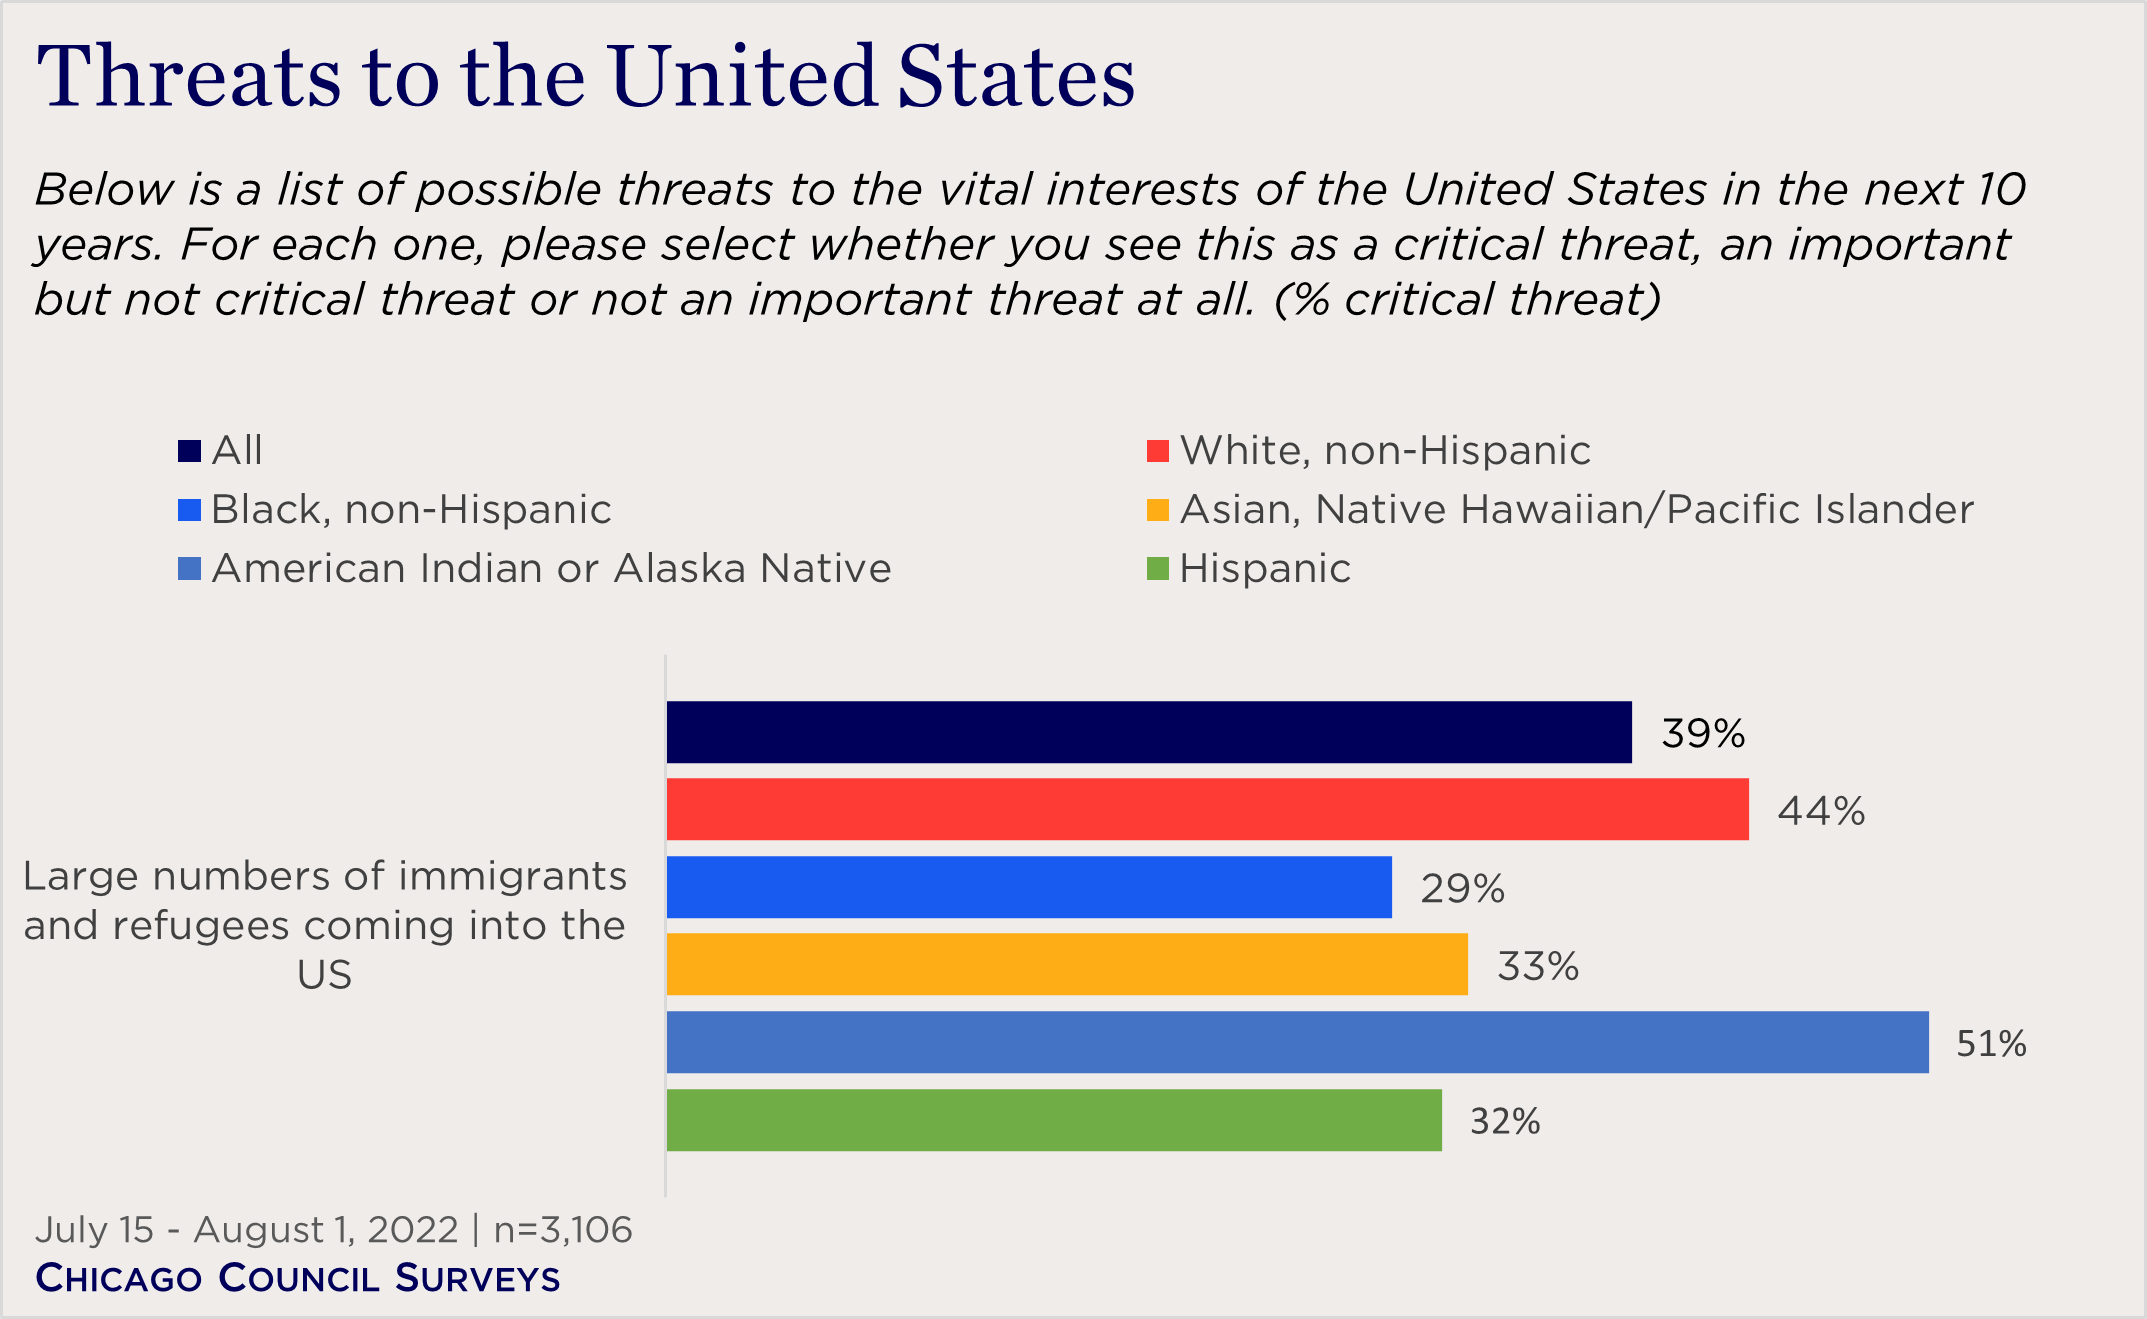 "bar chart of views of threats to the US by race"